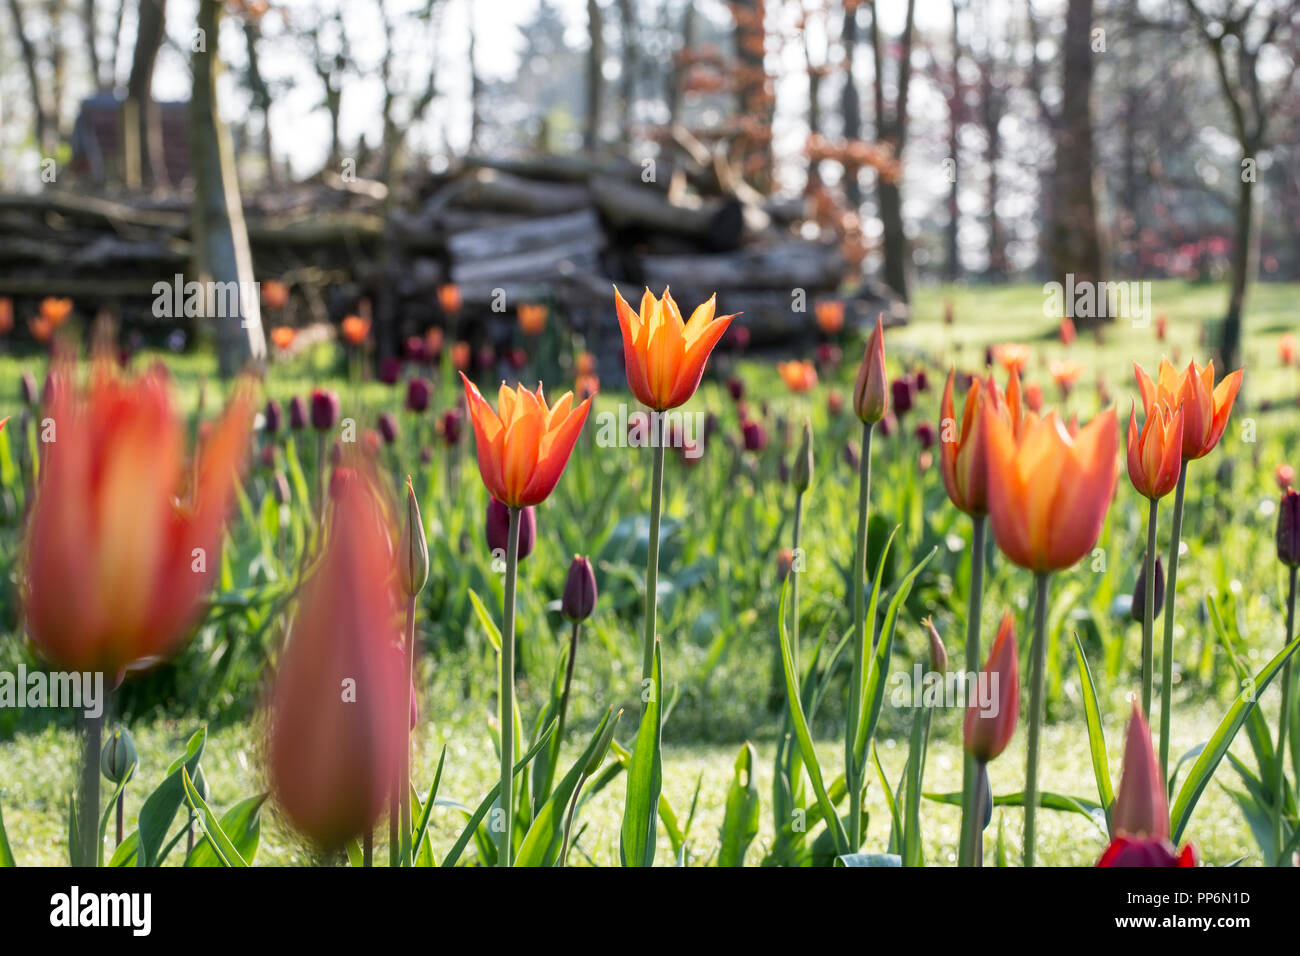 Close up of tulips with red and orange pointed blossoms. Stock Photo